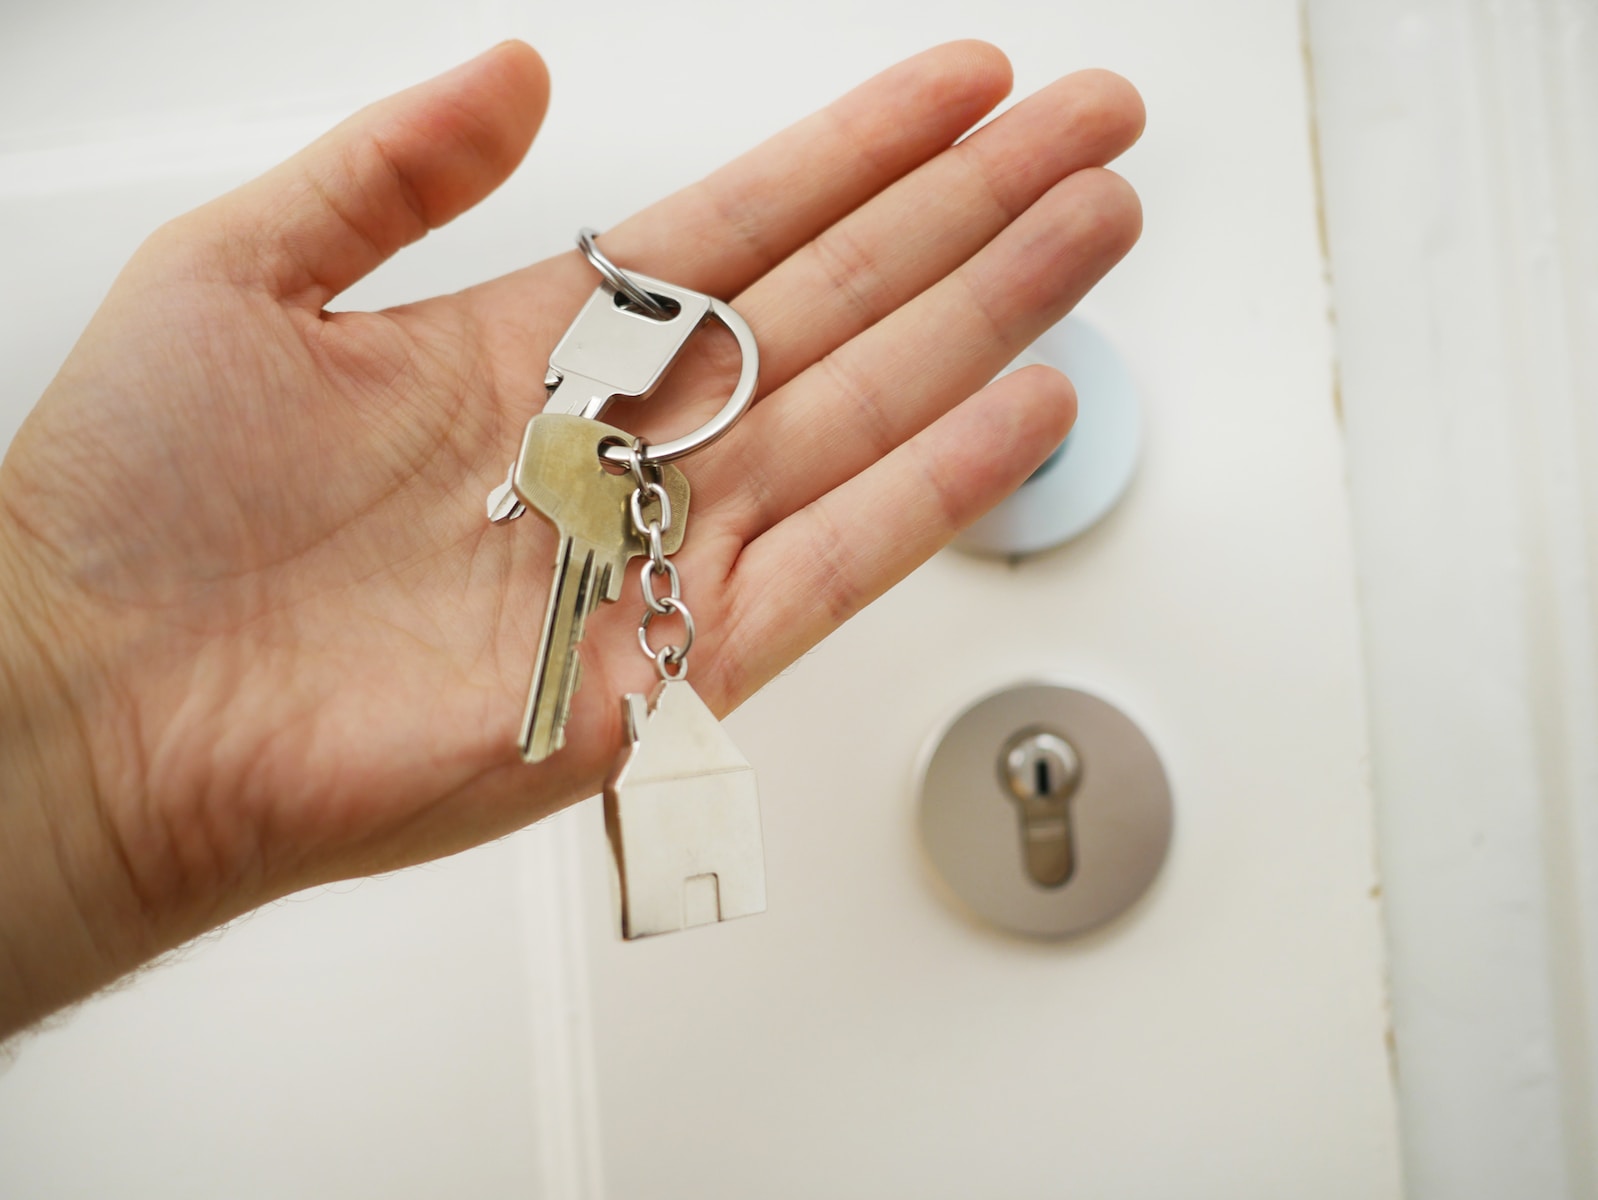 Emergency Locksmith in Charlotte: What to Look for When You Need Help Fast